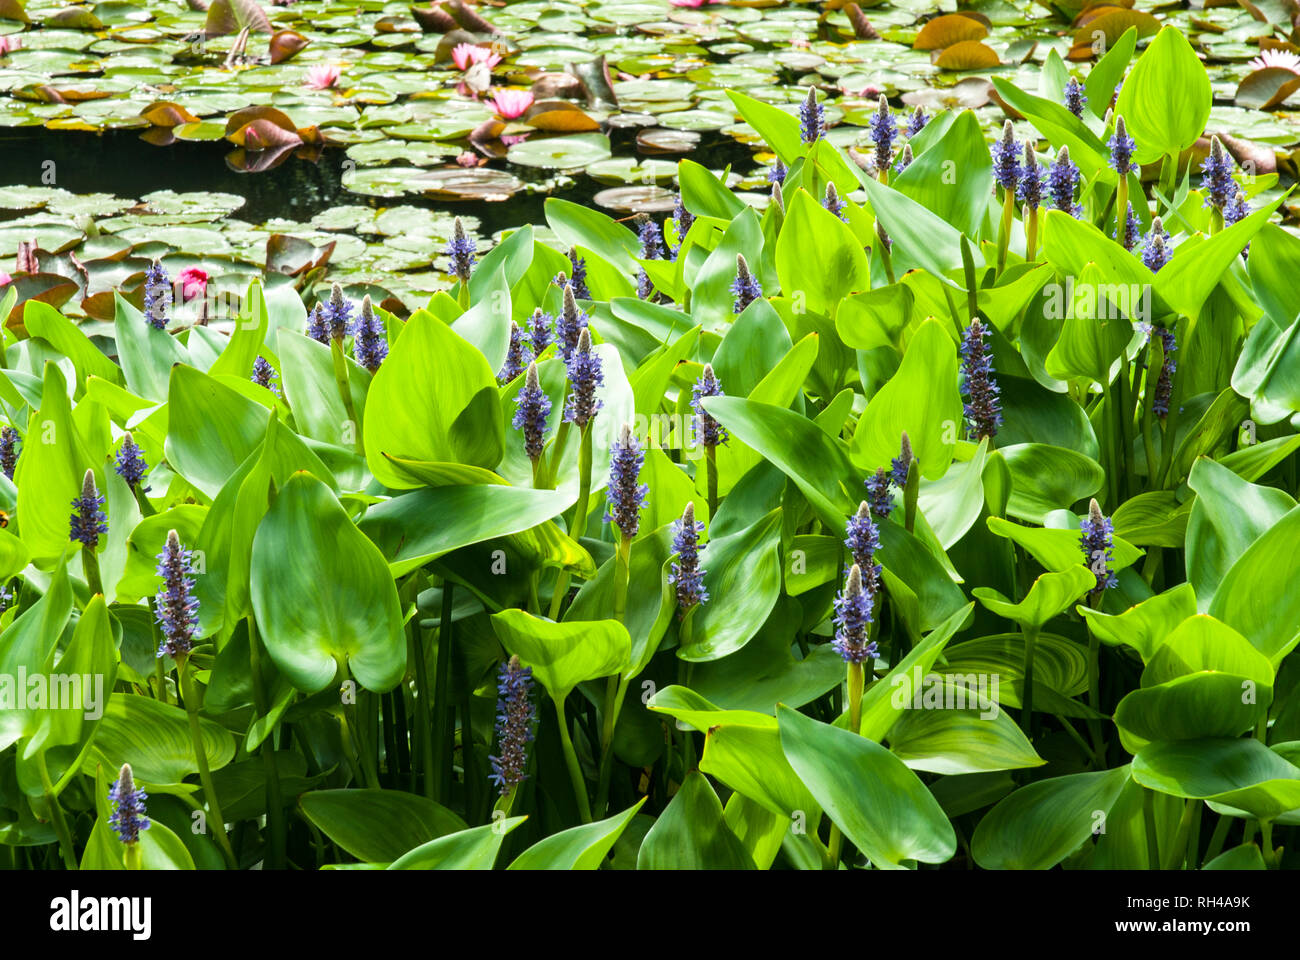 In the foreground a swathe of Giant Pickerel Weed with purple spikes of flowers and heart shaped leaves; in the background a pond with water lilies. Stock Photo